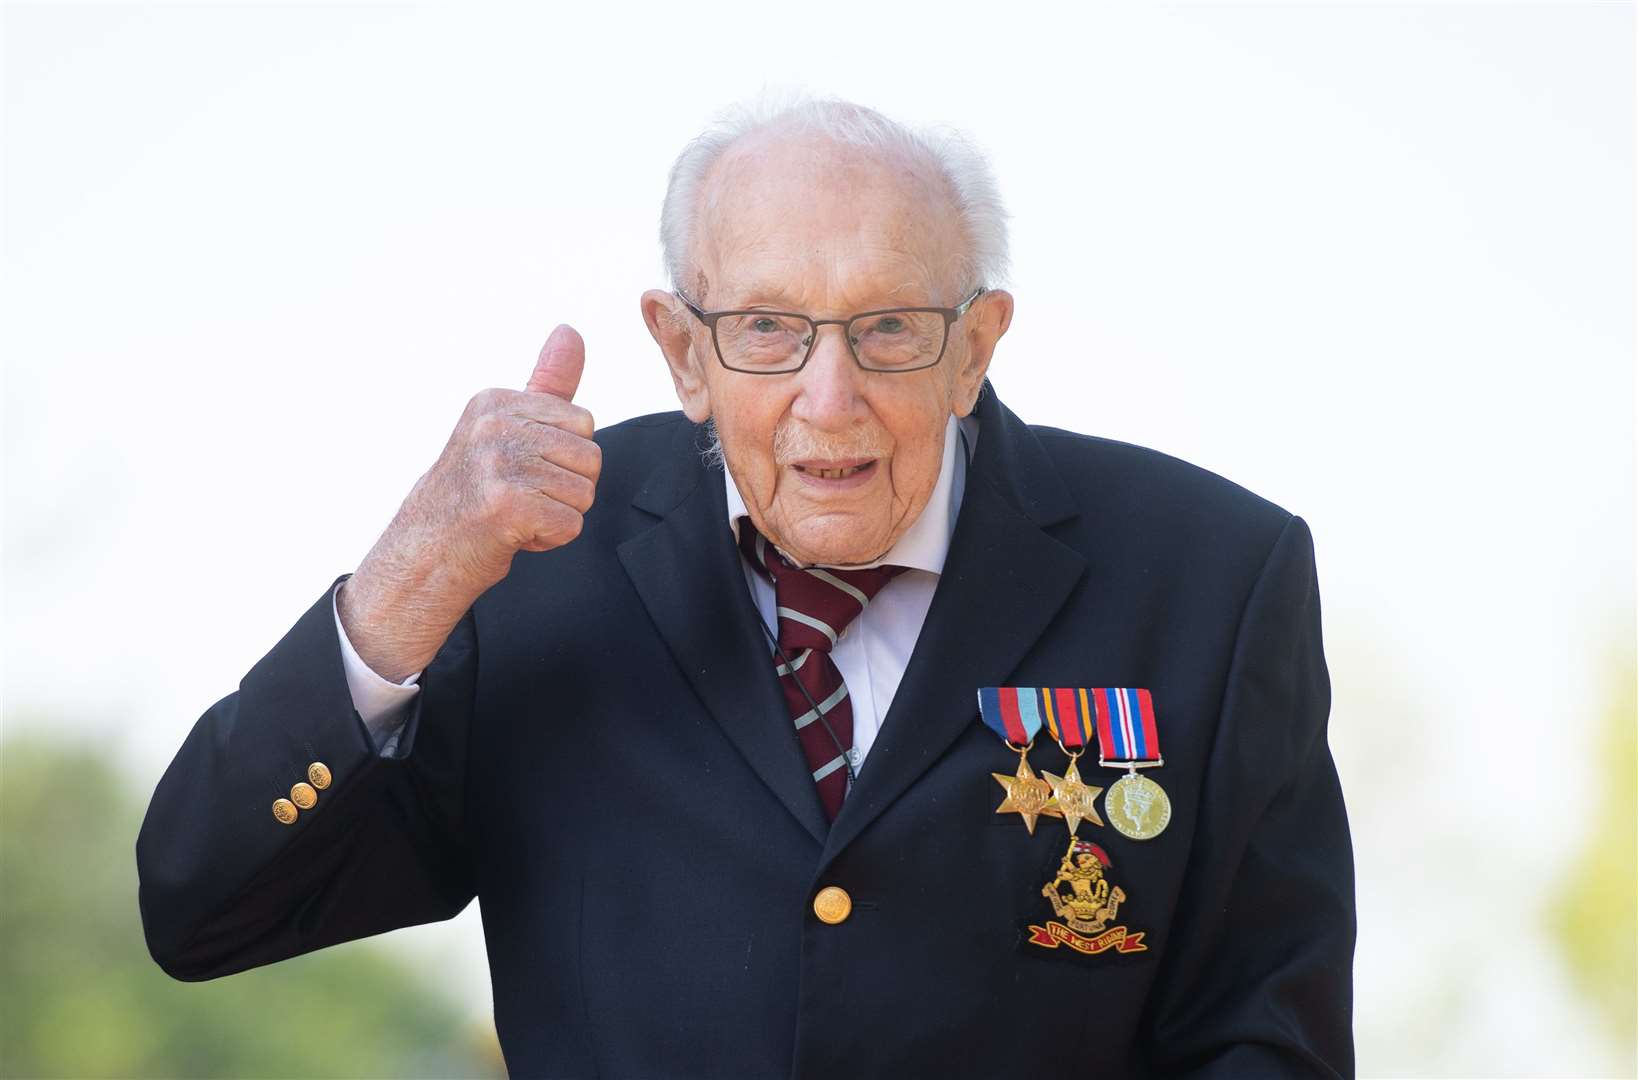 Captain Sir Tom Moore is looking forward to the special ceremony (Joe Giddens/PA)